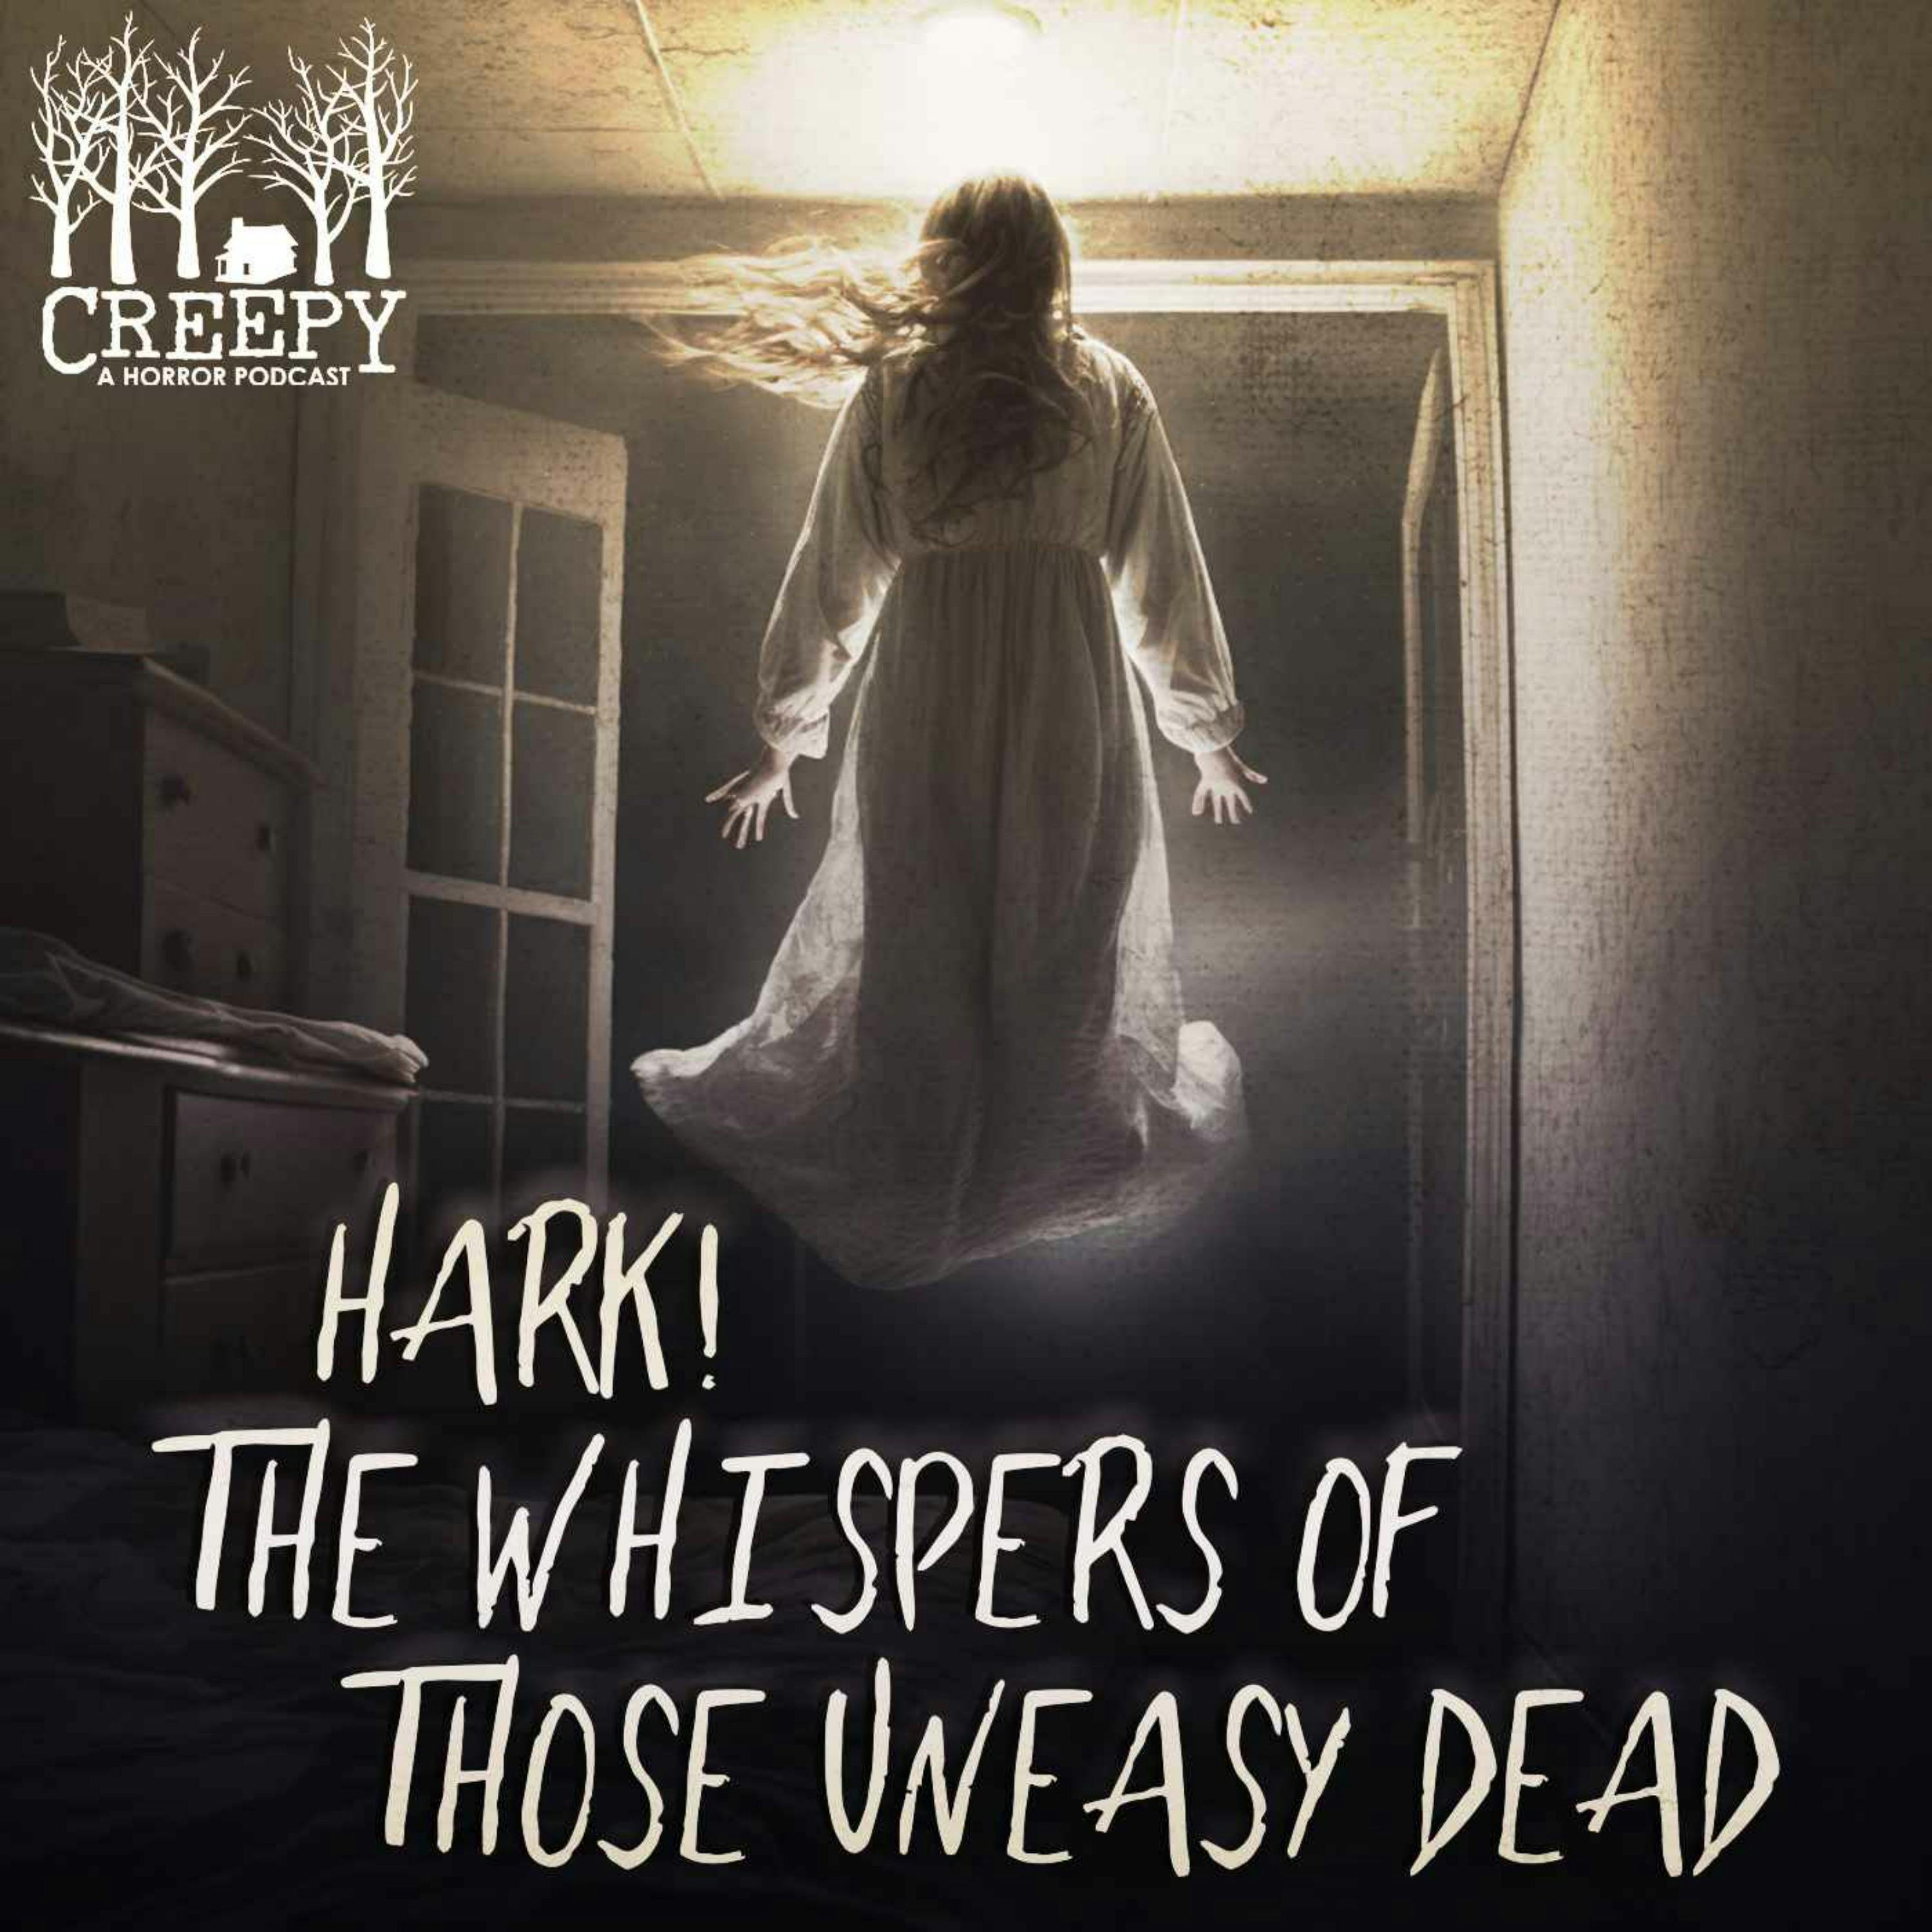 Hark! The Whispers of Those Uneasy Dead